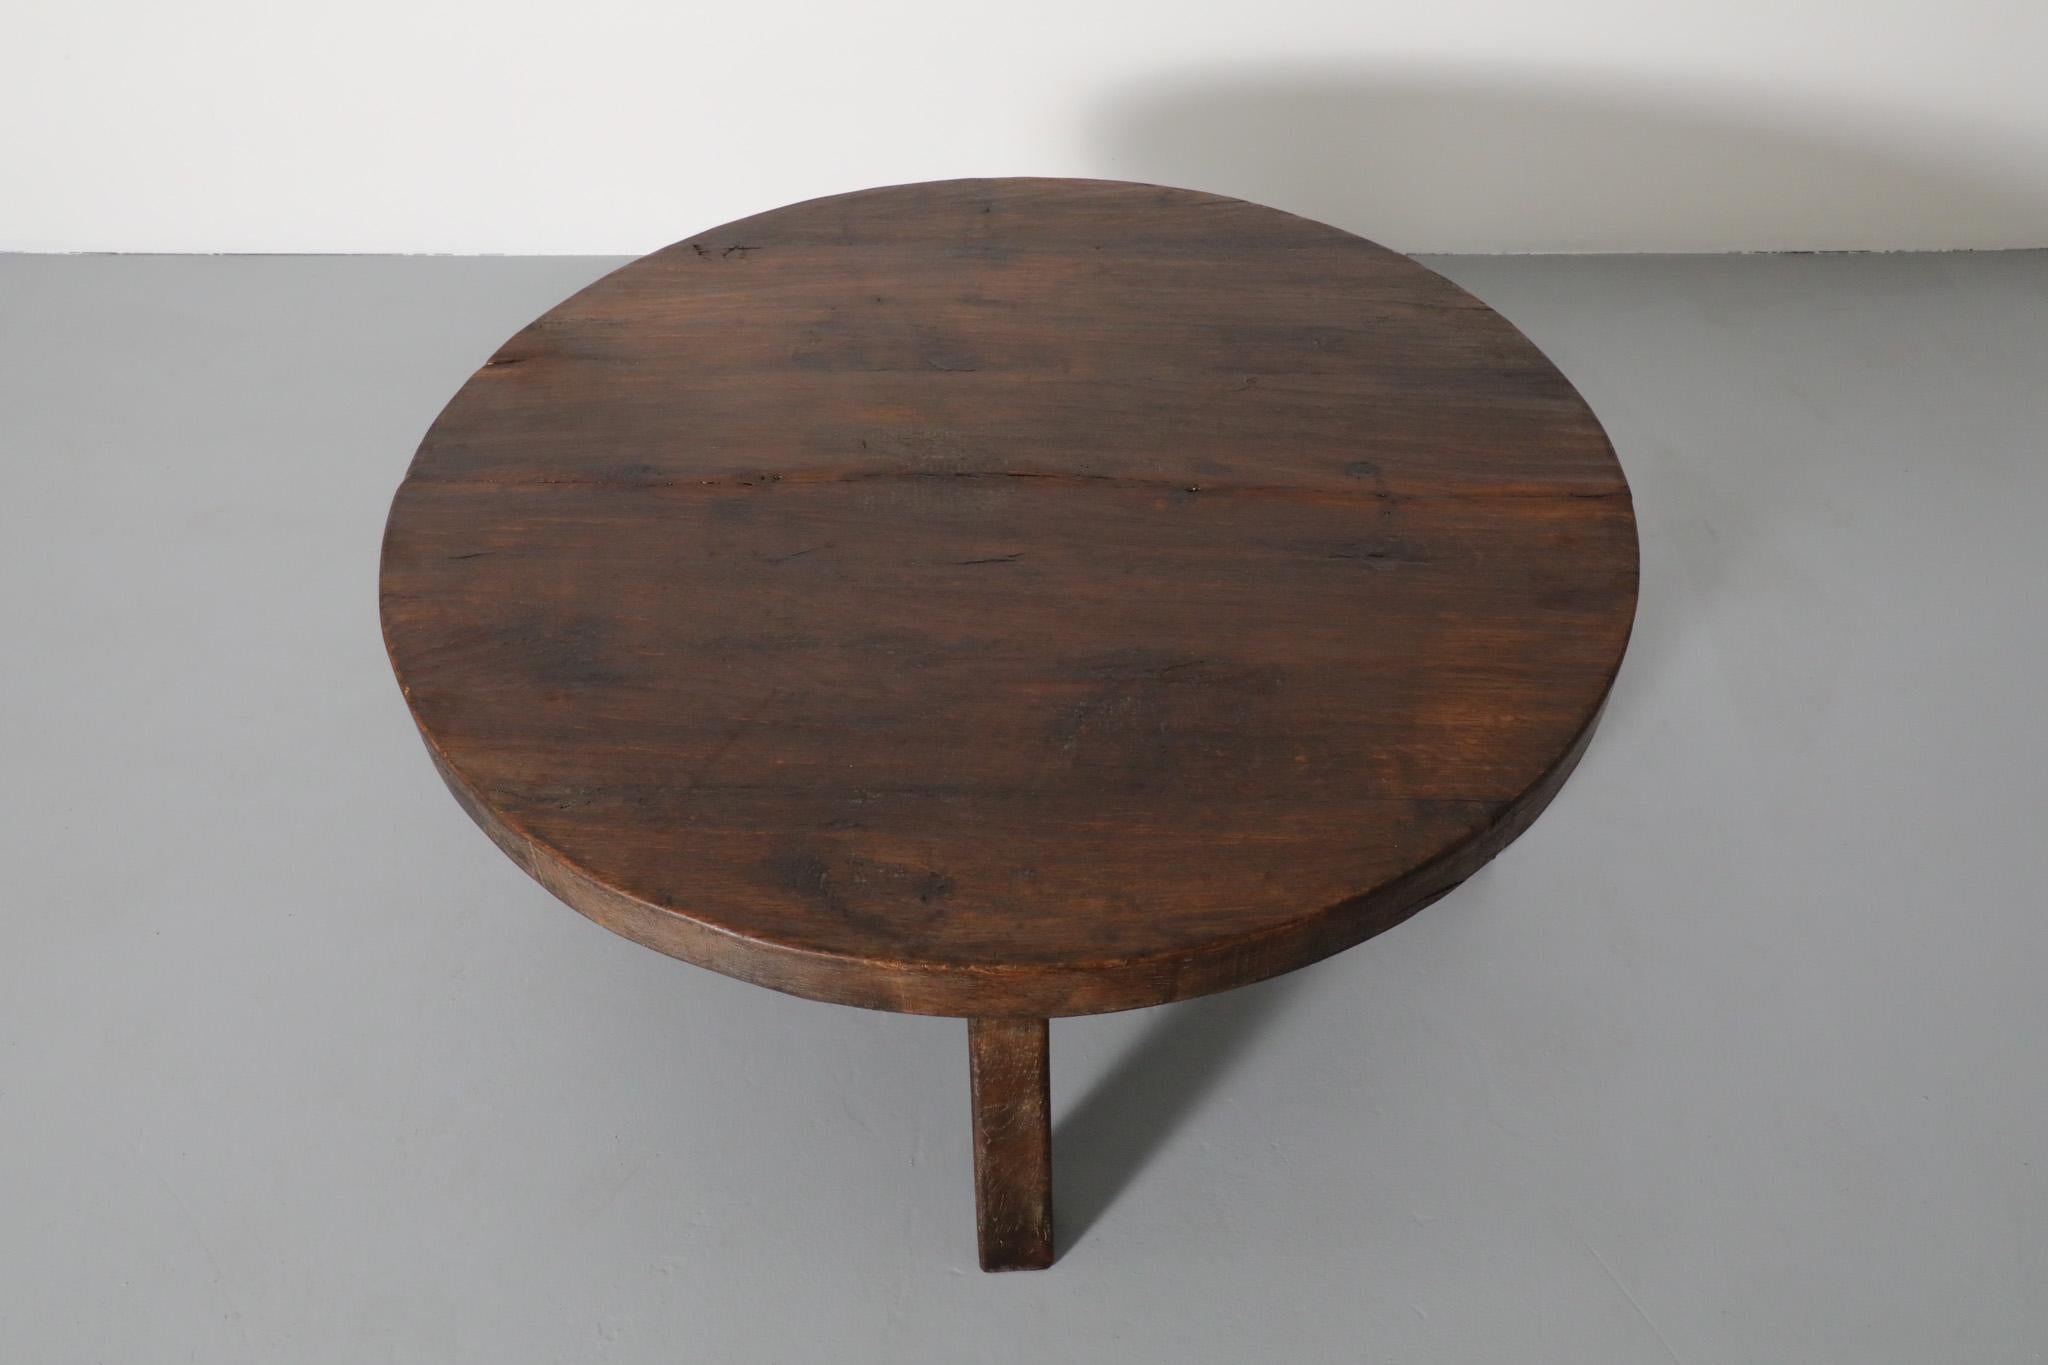 Pierre Chapo Style Brutalist Oak Coffee Table with Curved Legs For Sale 2